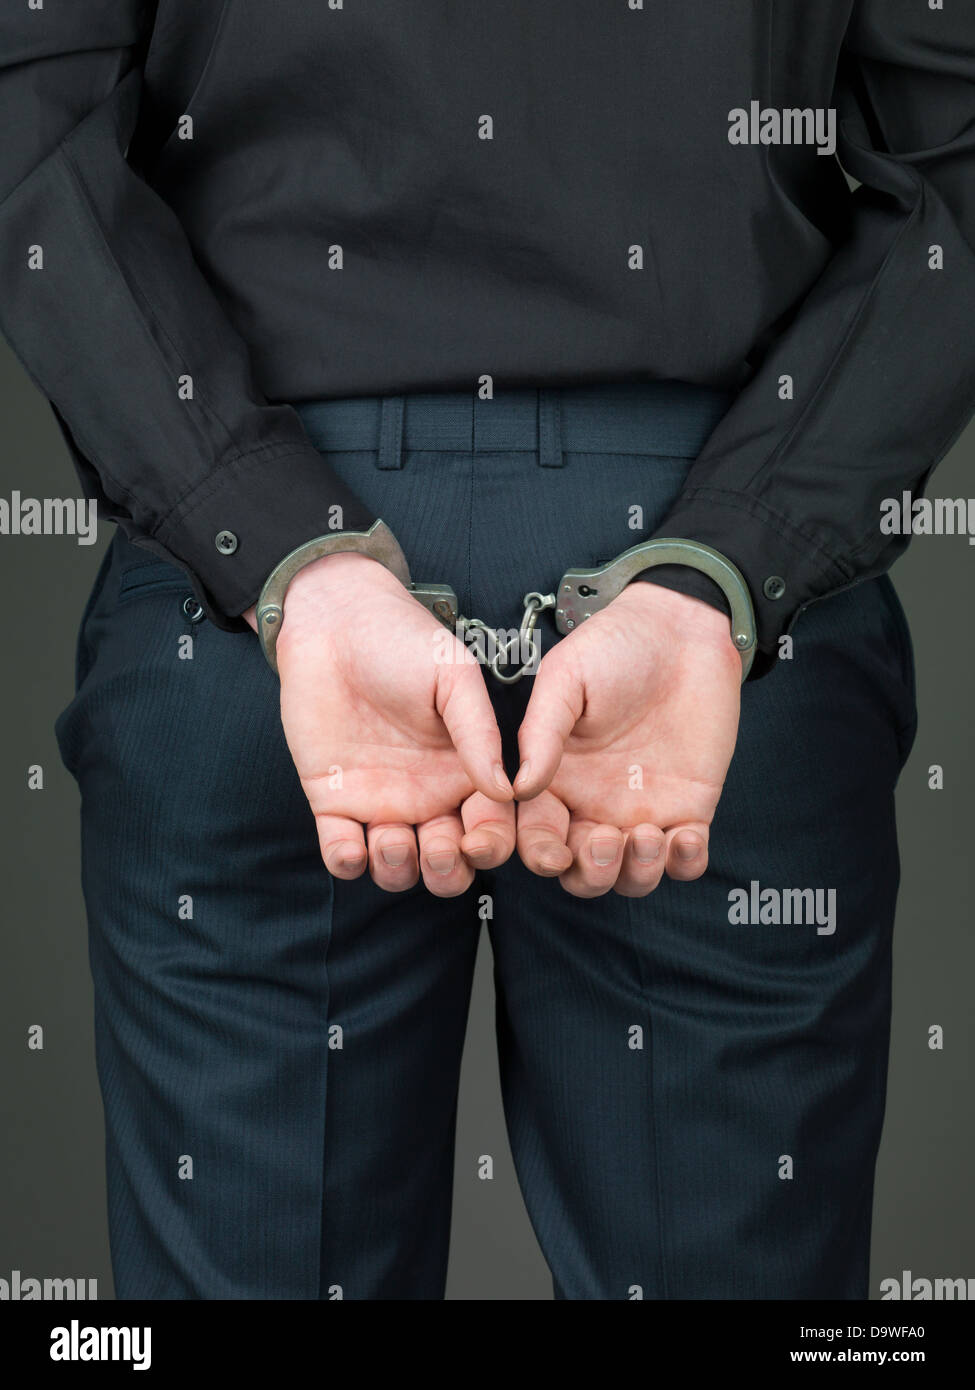 back view of a person dressed in black; handcuffed with their hands behind their back and their palms open Stock Photo